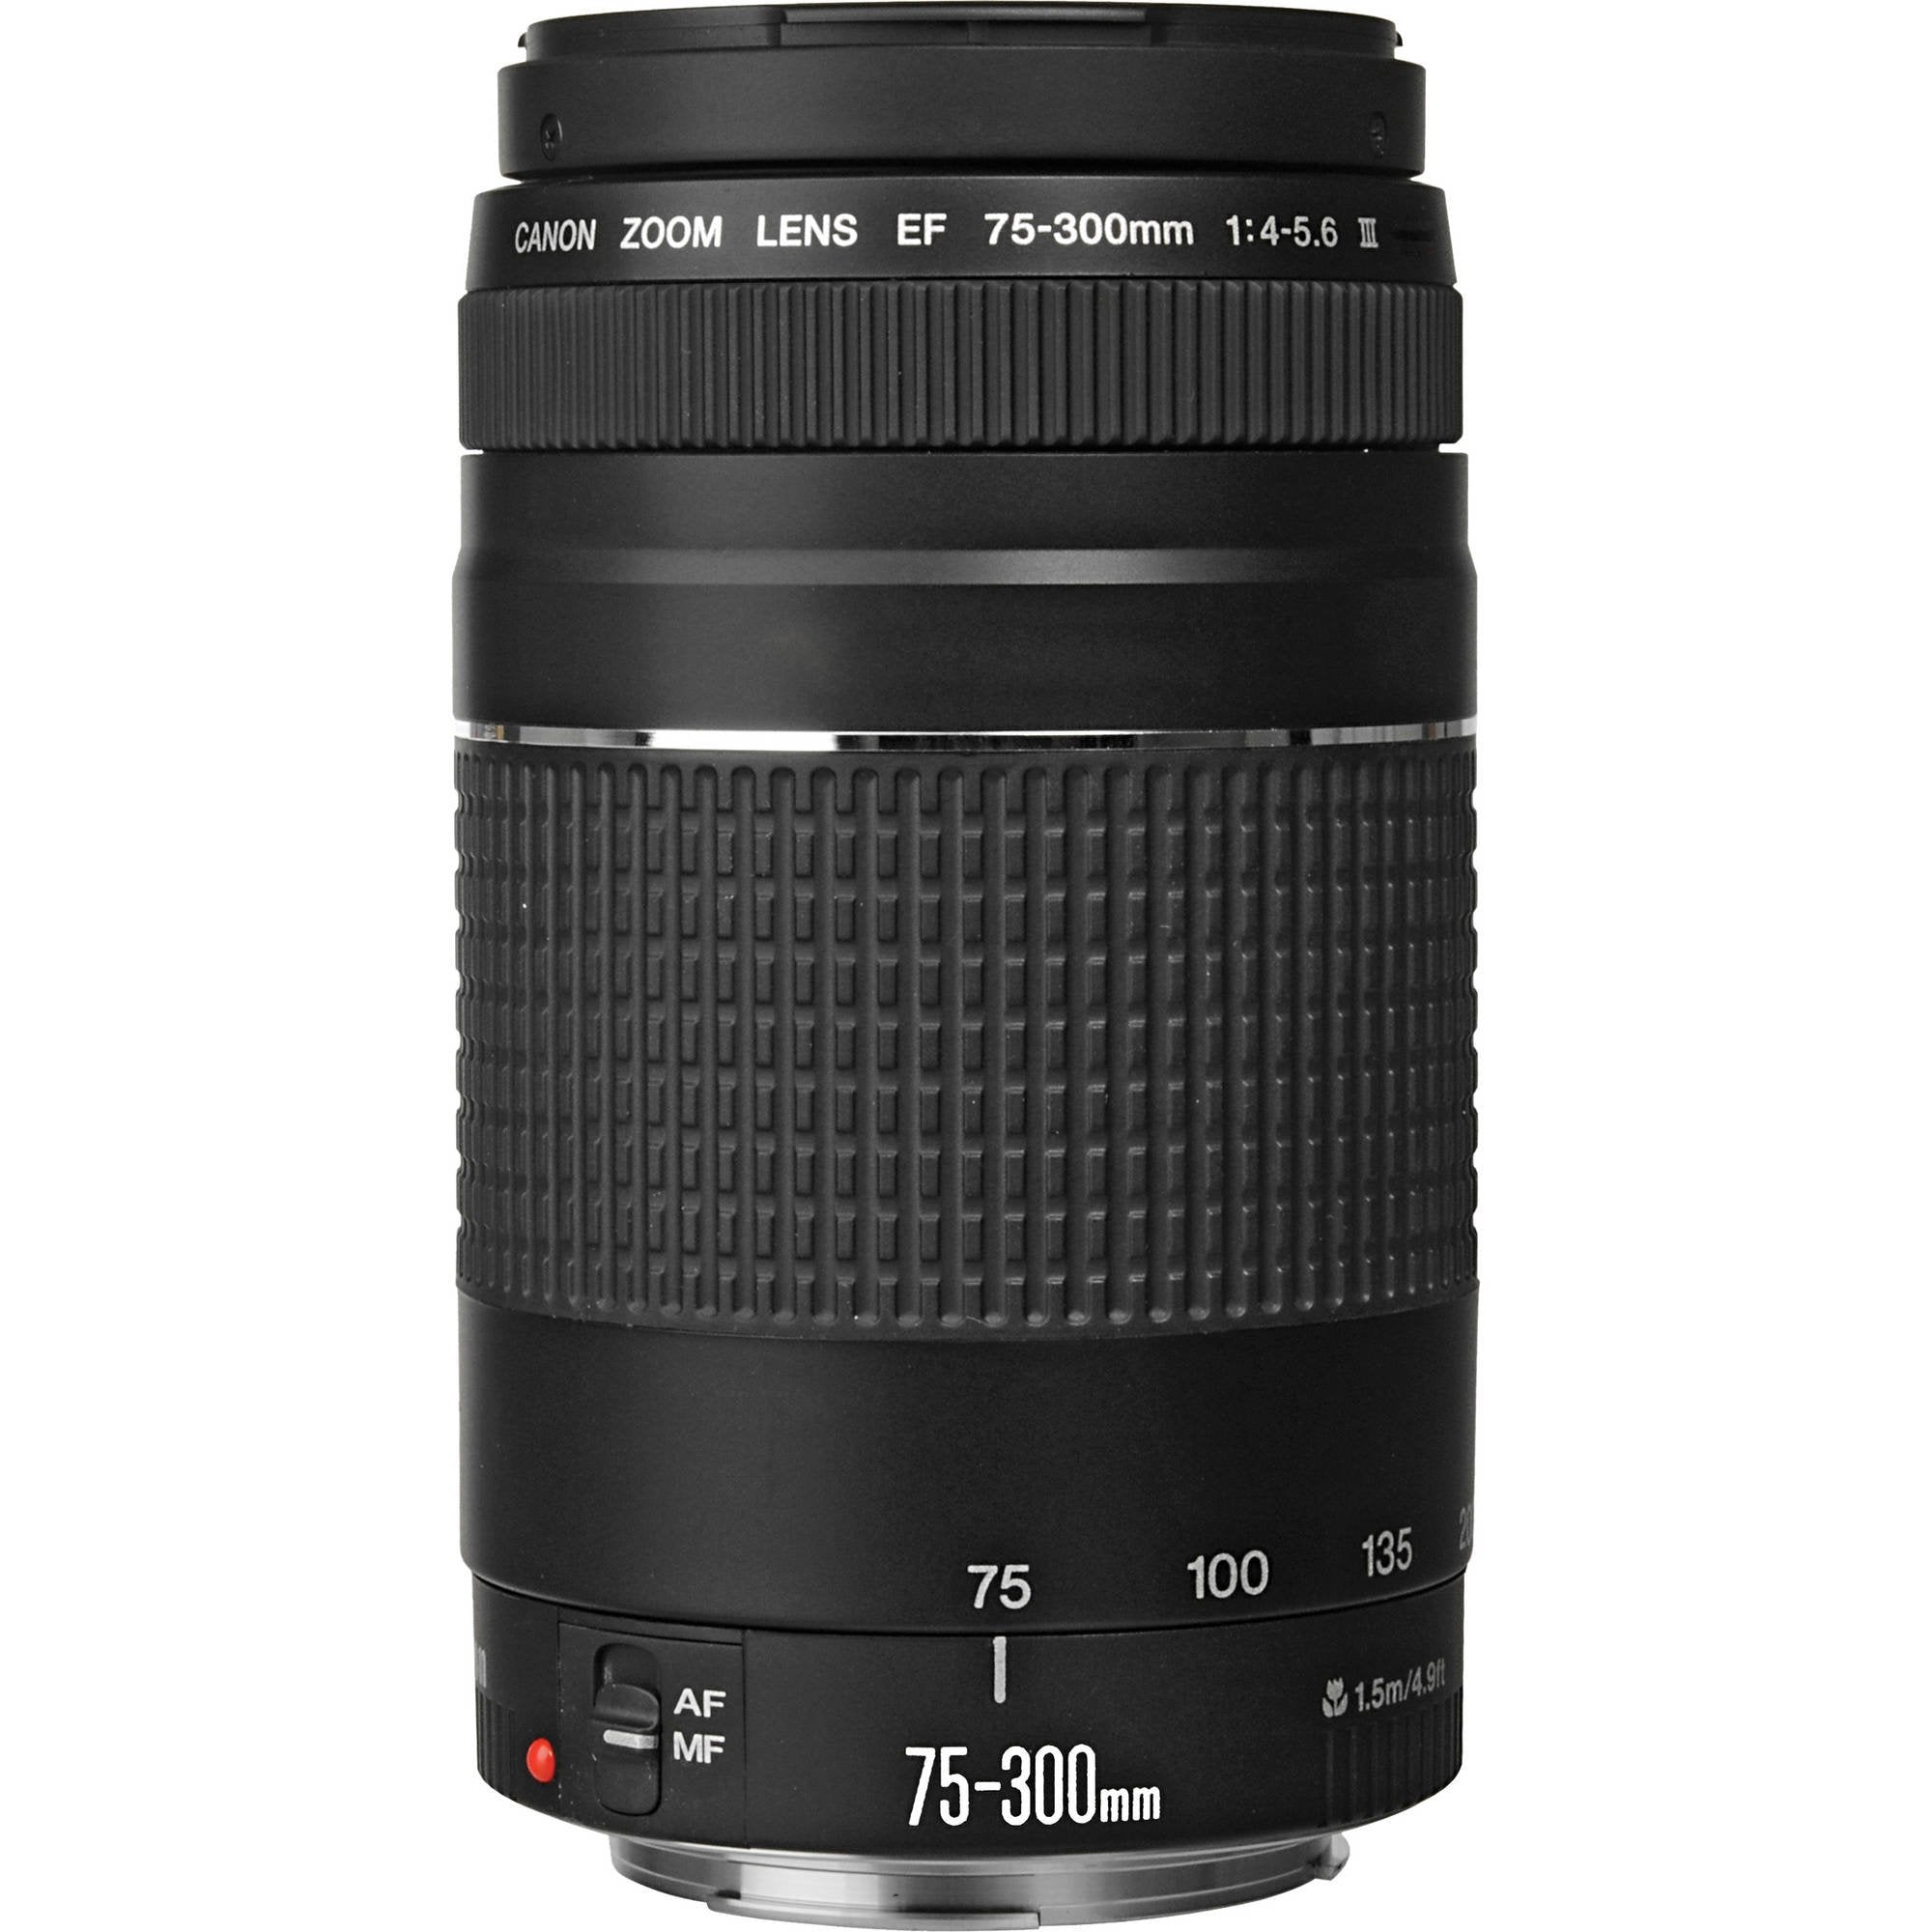 Canon EF 75-300mm f/4-5.6 III Telephoto Zoom Lens 6473A003 + Lens Pen Cleaner + Deluxe Lens Pouch + 58mm 3 Piece Filter